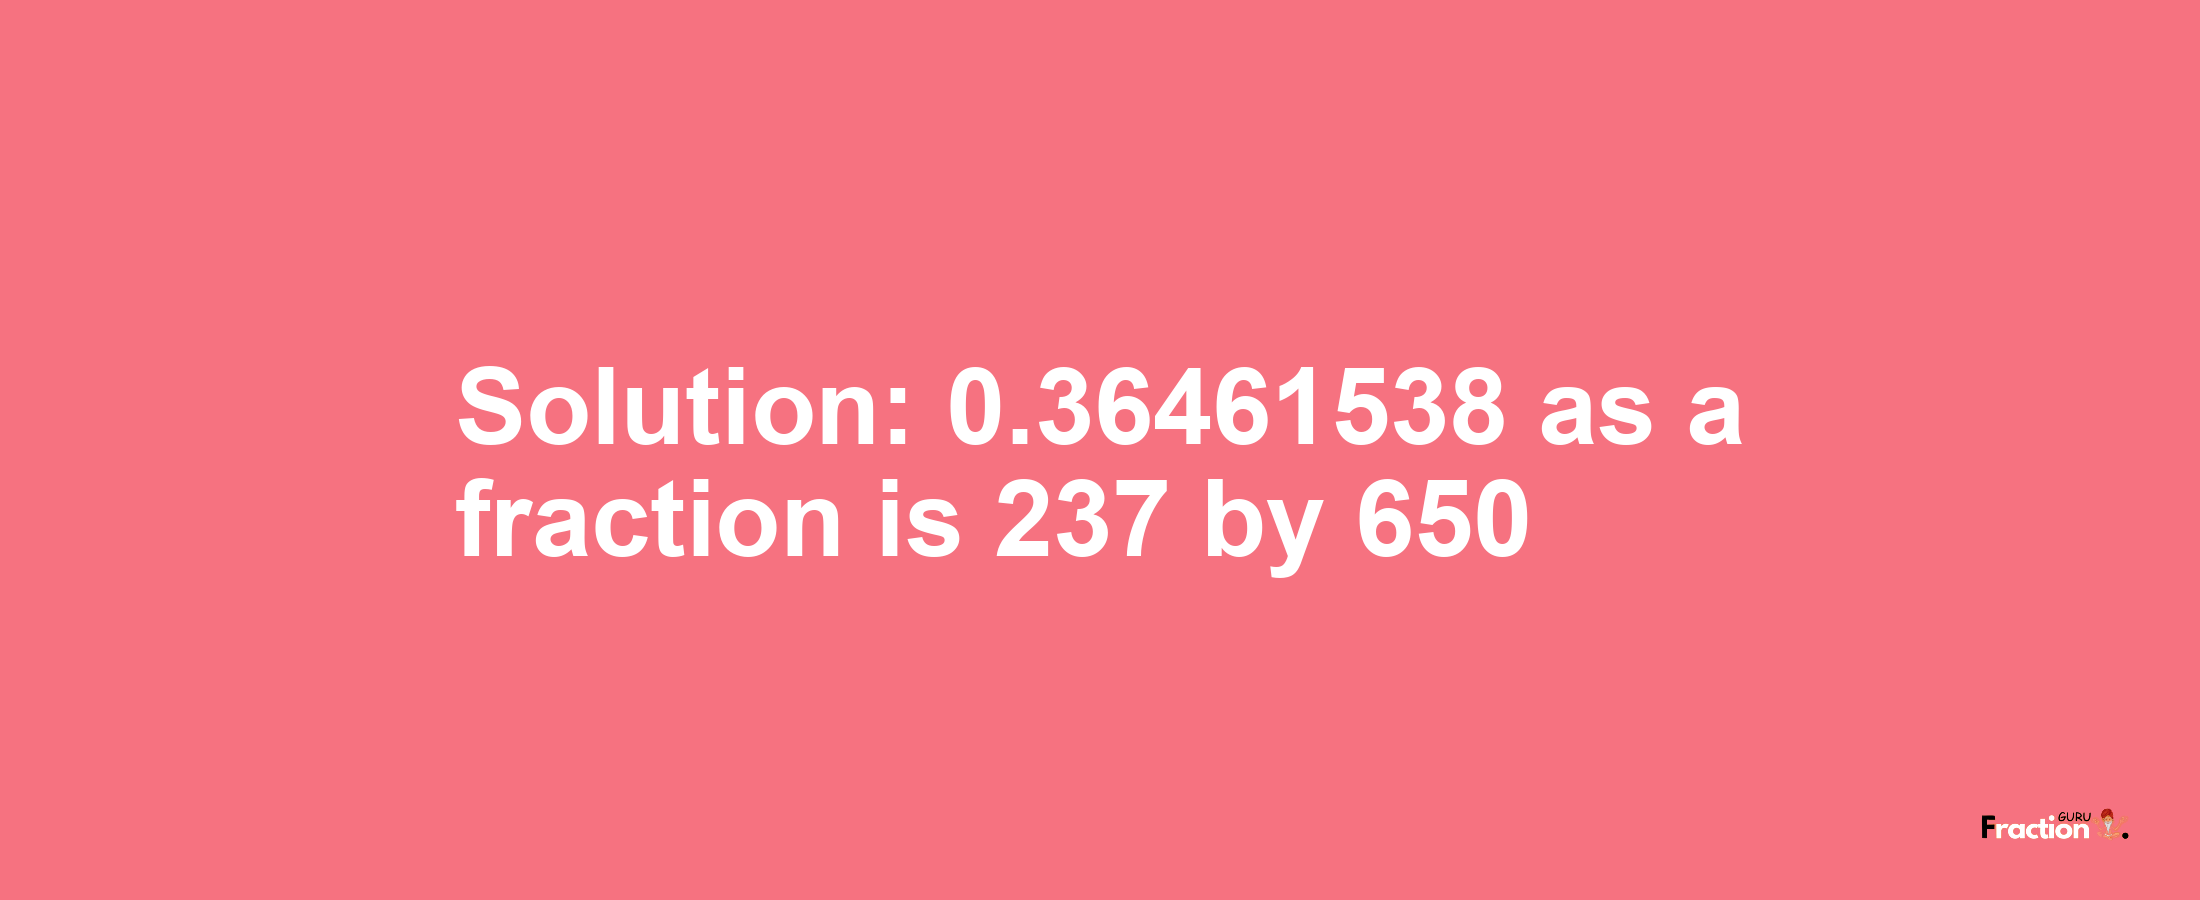 Solution:0.36461538 as a fraction is 237/650